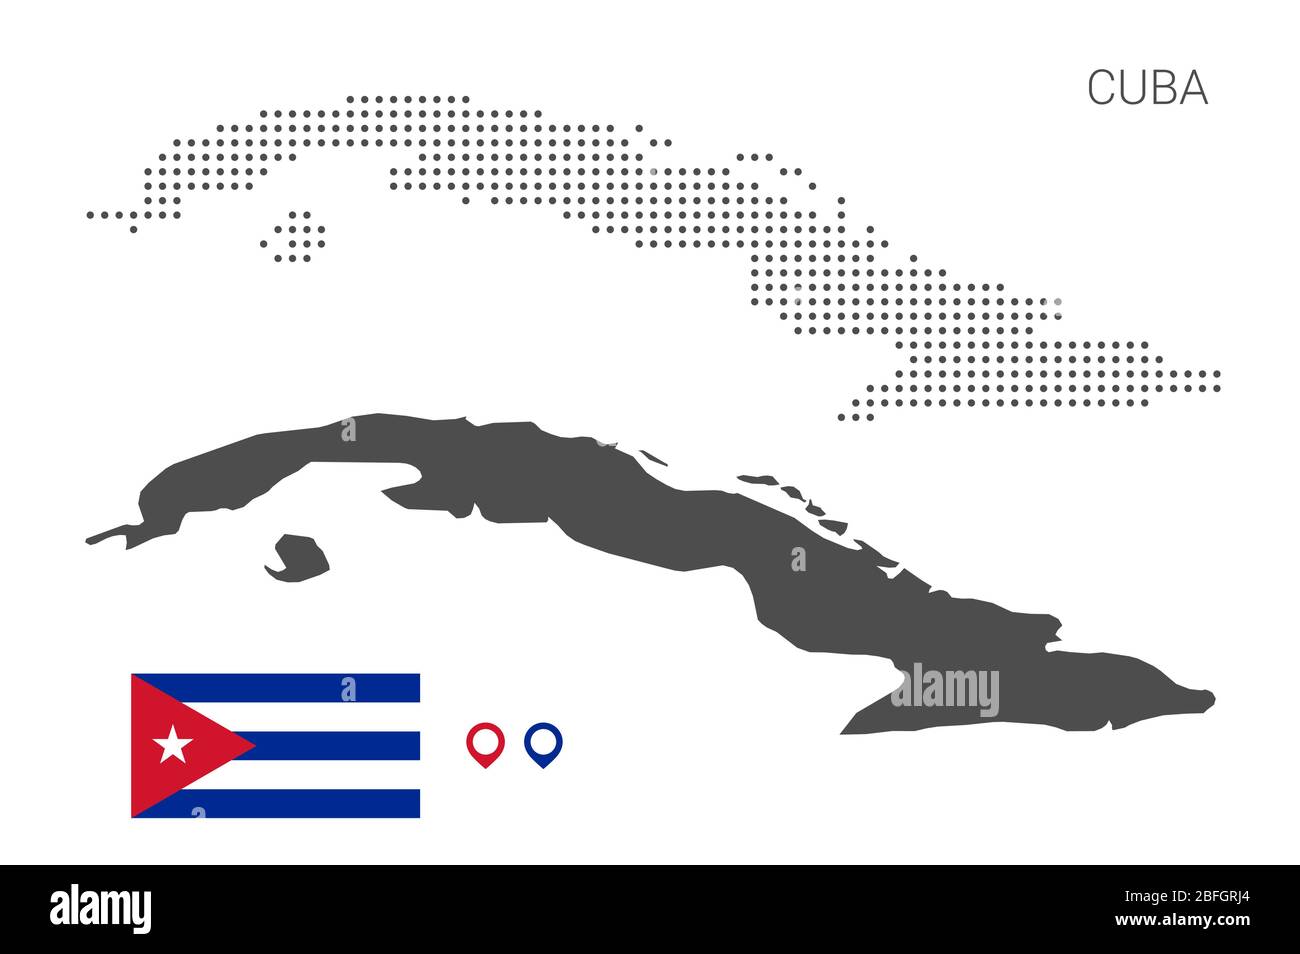 Dotted cuba map with national flag and map marker. Illustration for technology design or infographics. Isolated on white background. Stock Vector